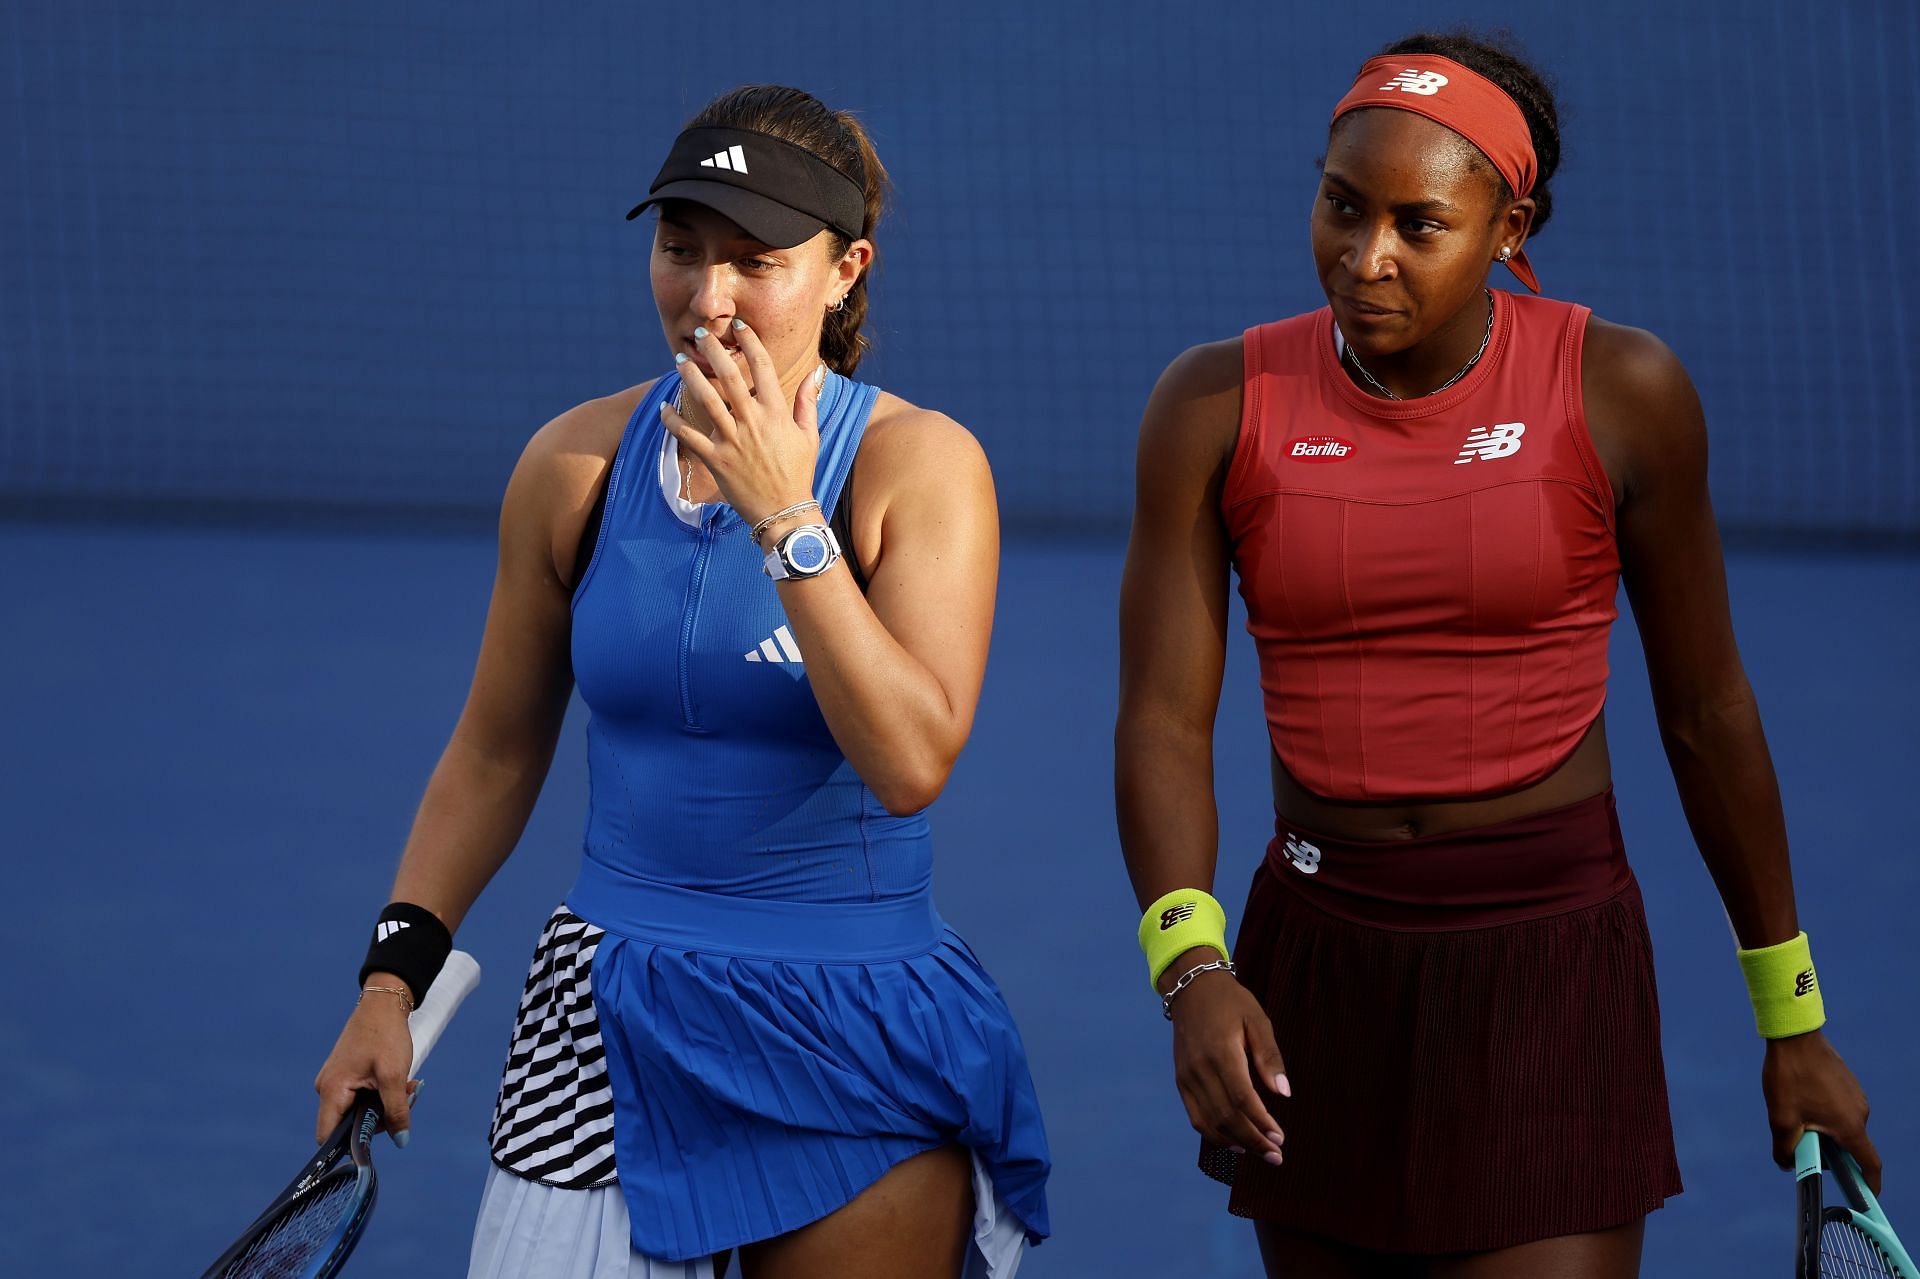 Jessica Pegula (L) and Coco Gauff pictured at the 2023 US Open